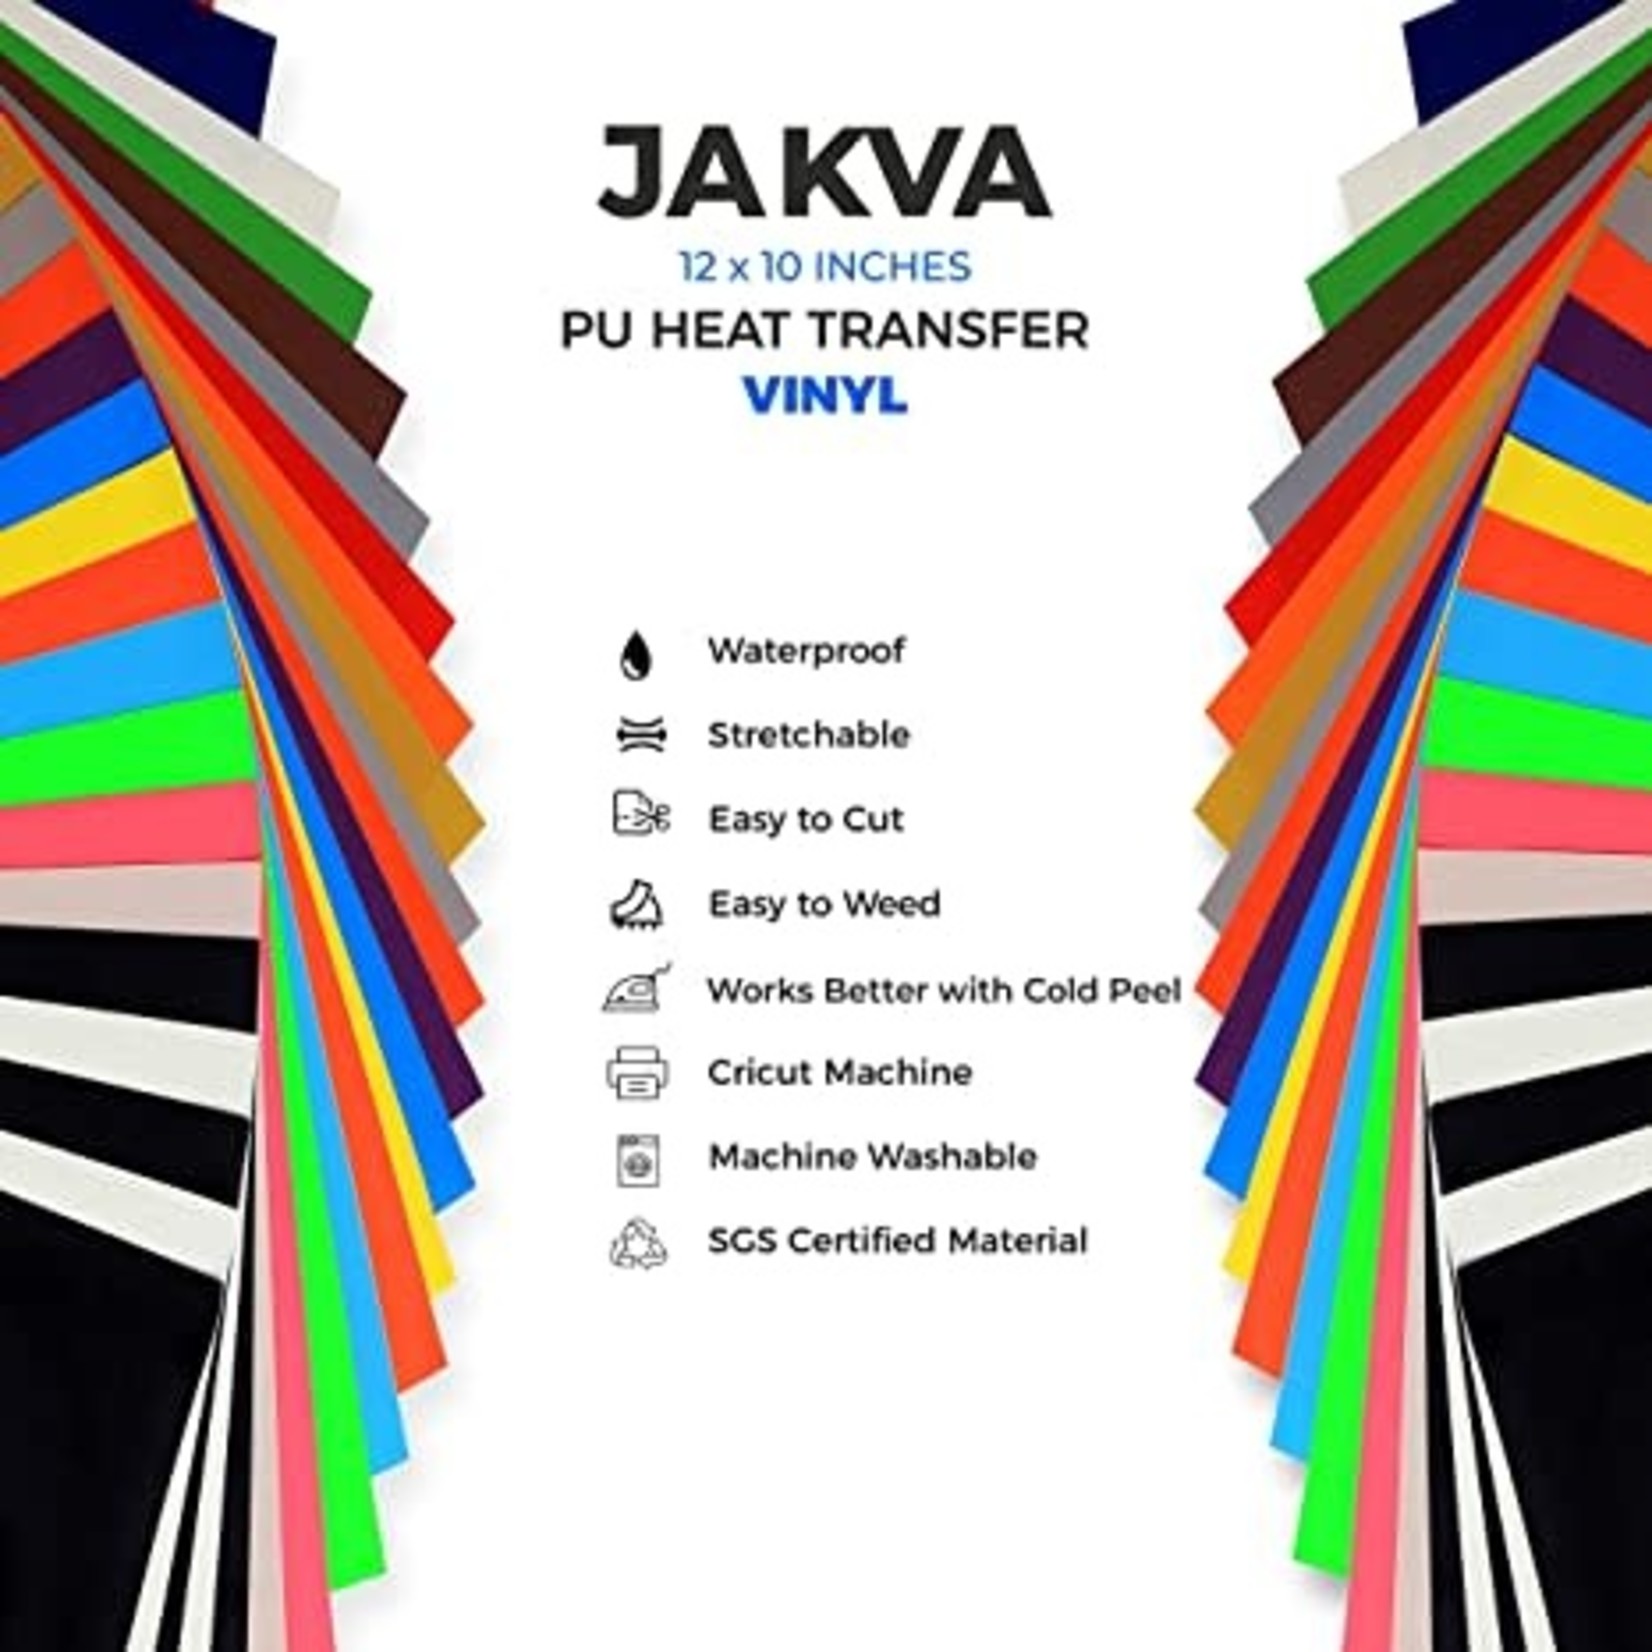 Jakva Heat Transfer Vinyl Sheets Bundle - Pack of 25 -【 Apply Once Peel Is Cold 】- 12x10 Bonus Teflon Sheet with 19 Assorted Colors of Iron on